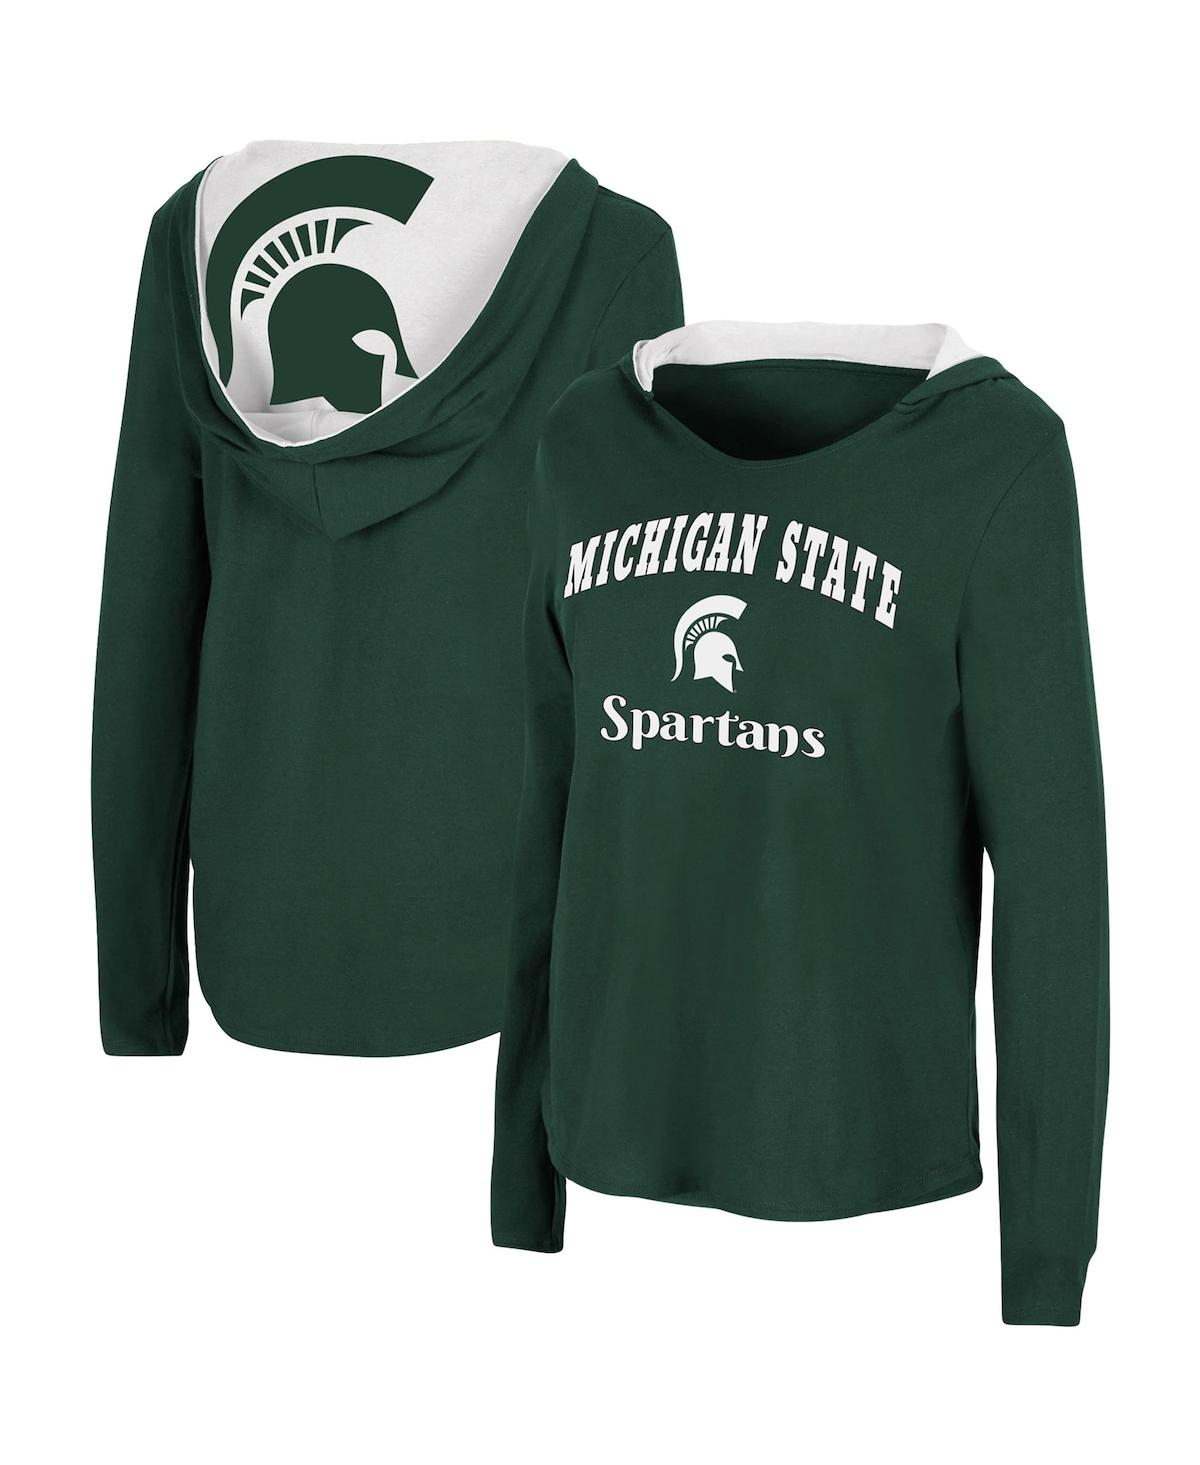 COLOSSEUM WOMEN'S COLOSSEUM GREEN MICHIGAN STATE SPARTANS CATALINA HOODIE LONG SLEEVE T-SHIRT